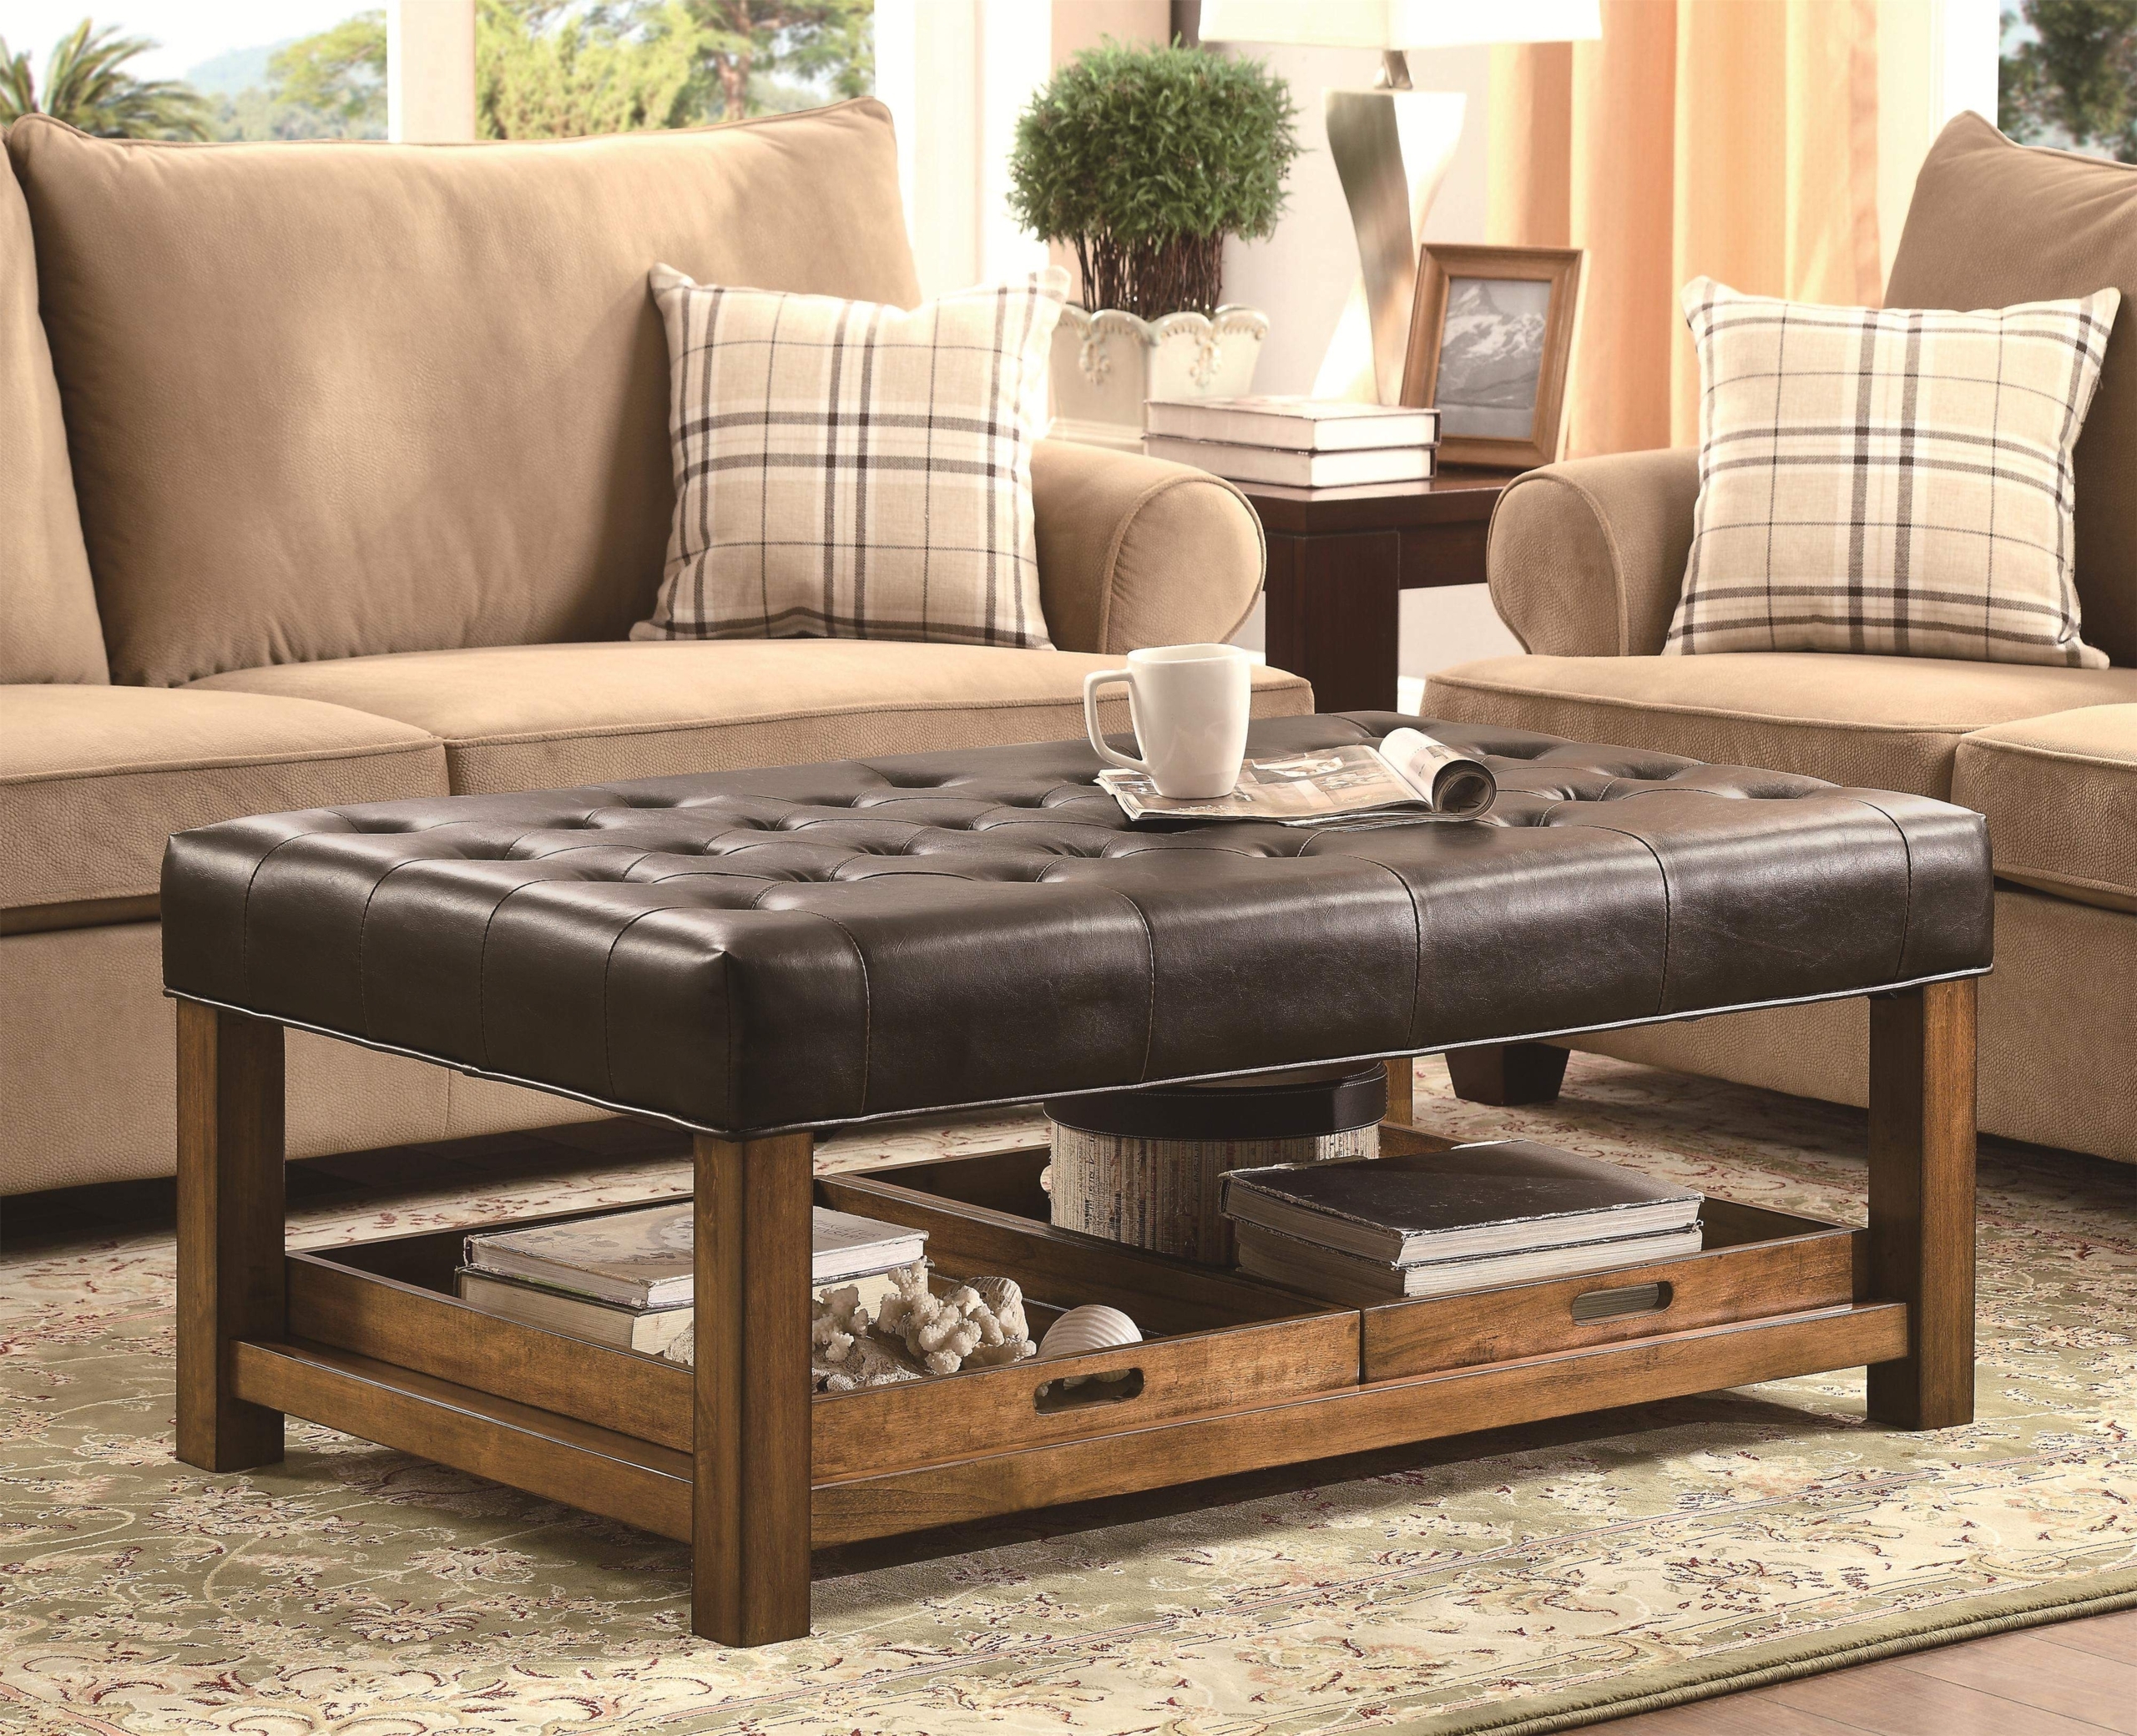 Leather Tufted Ottoman Coffee Table Foter